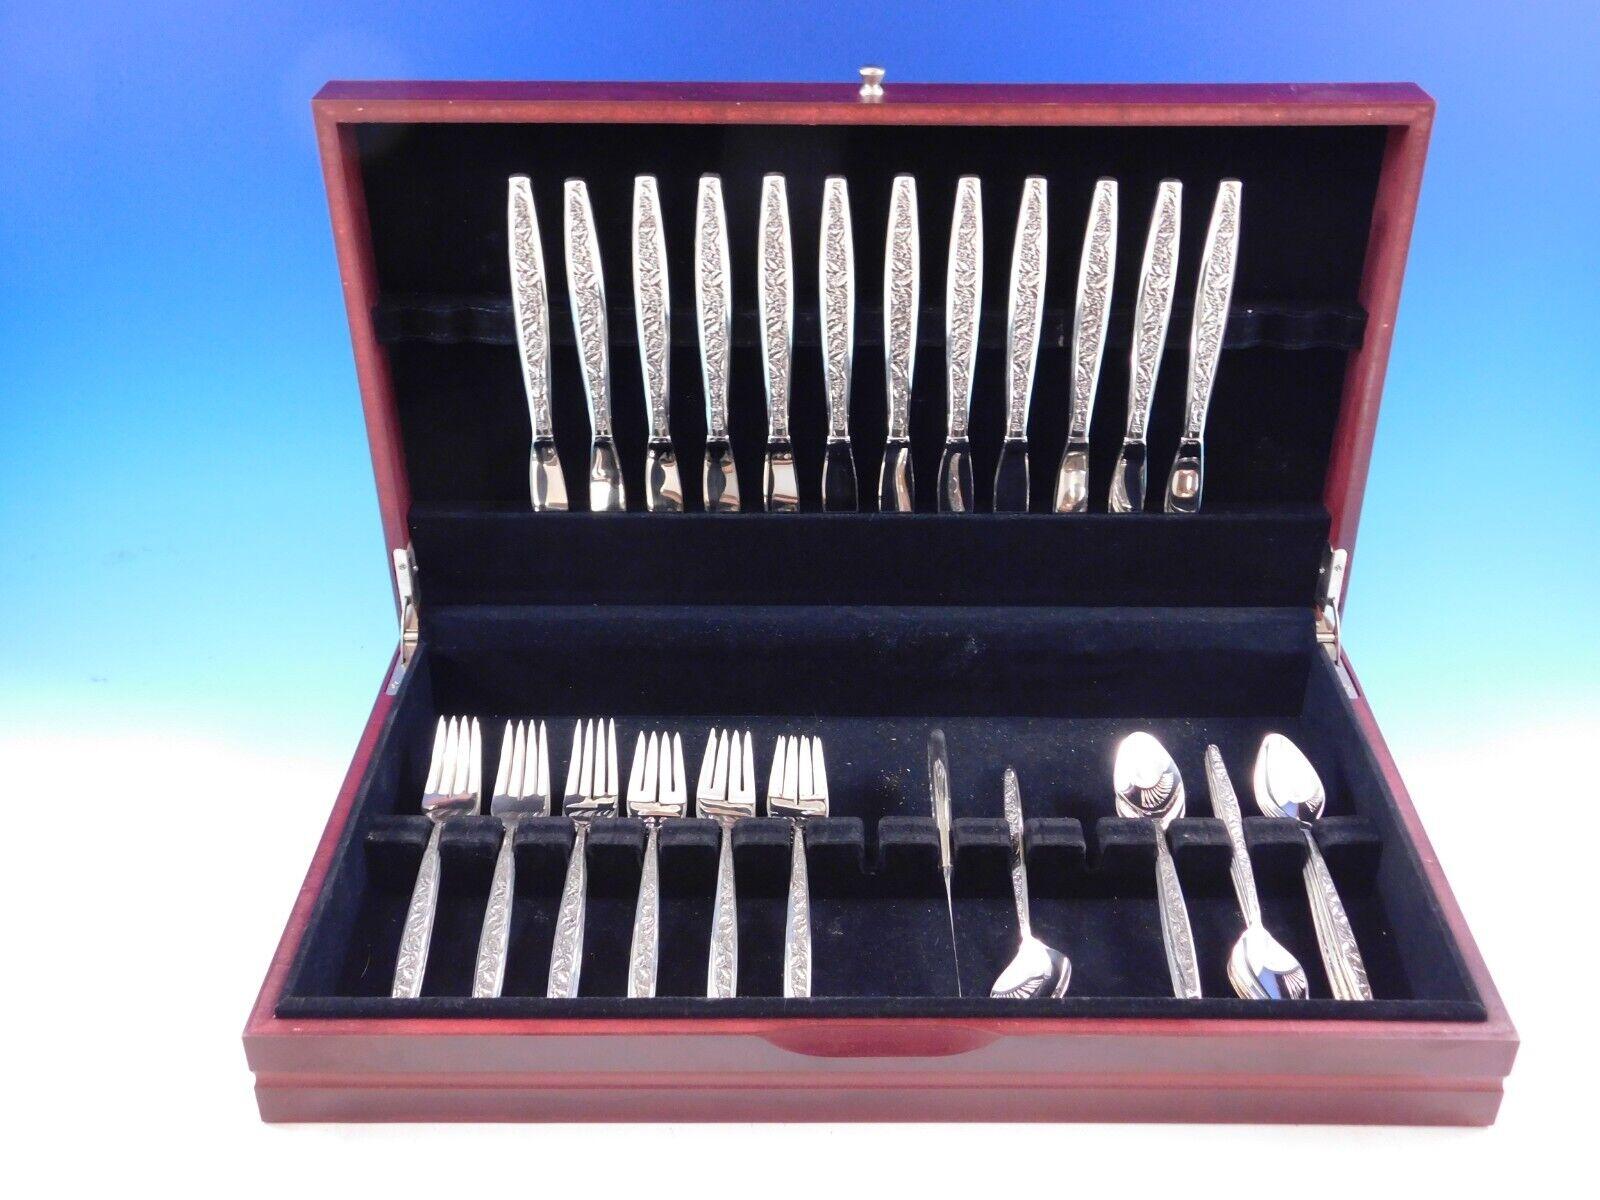 Valencia by International Sterling silver Flatware set, 48 pieces. The Valencia pattern was introduced in the year 1964 and features a contemporary elongated handle with an allover decorative floral & leaf pattern on the front. This set